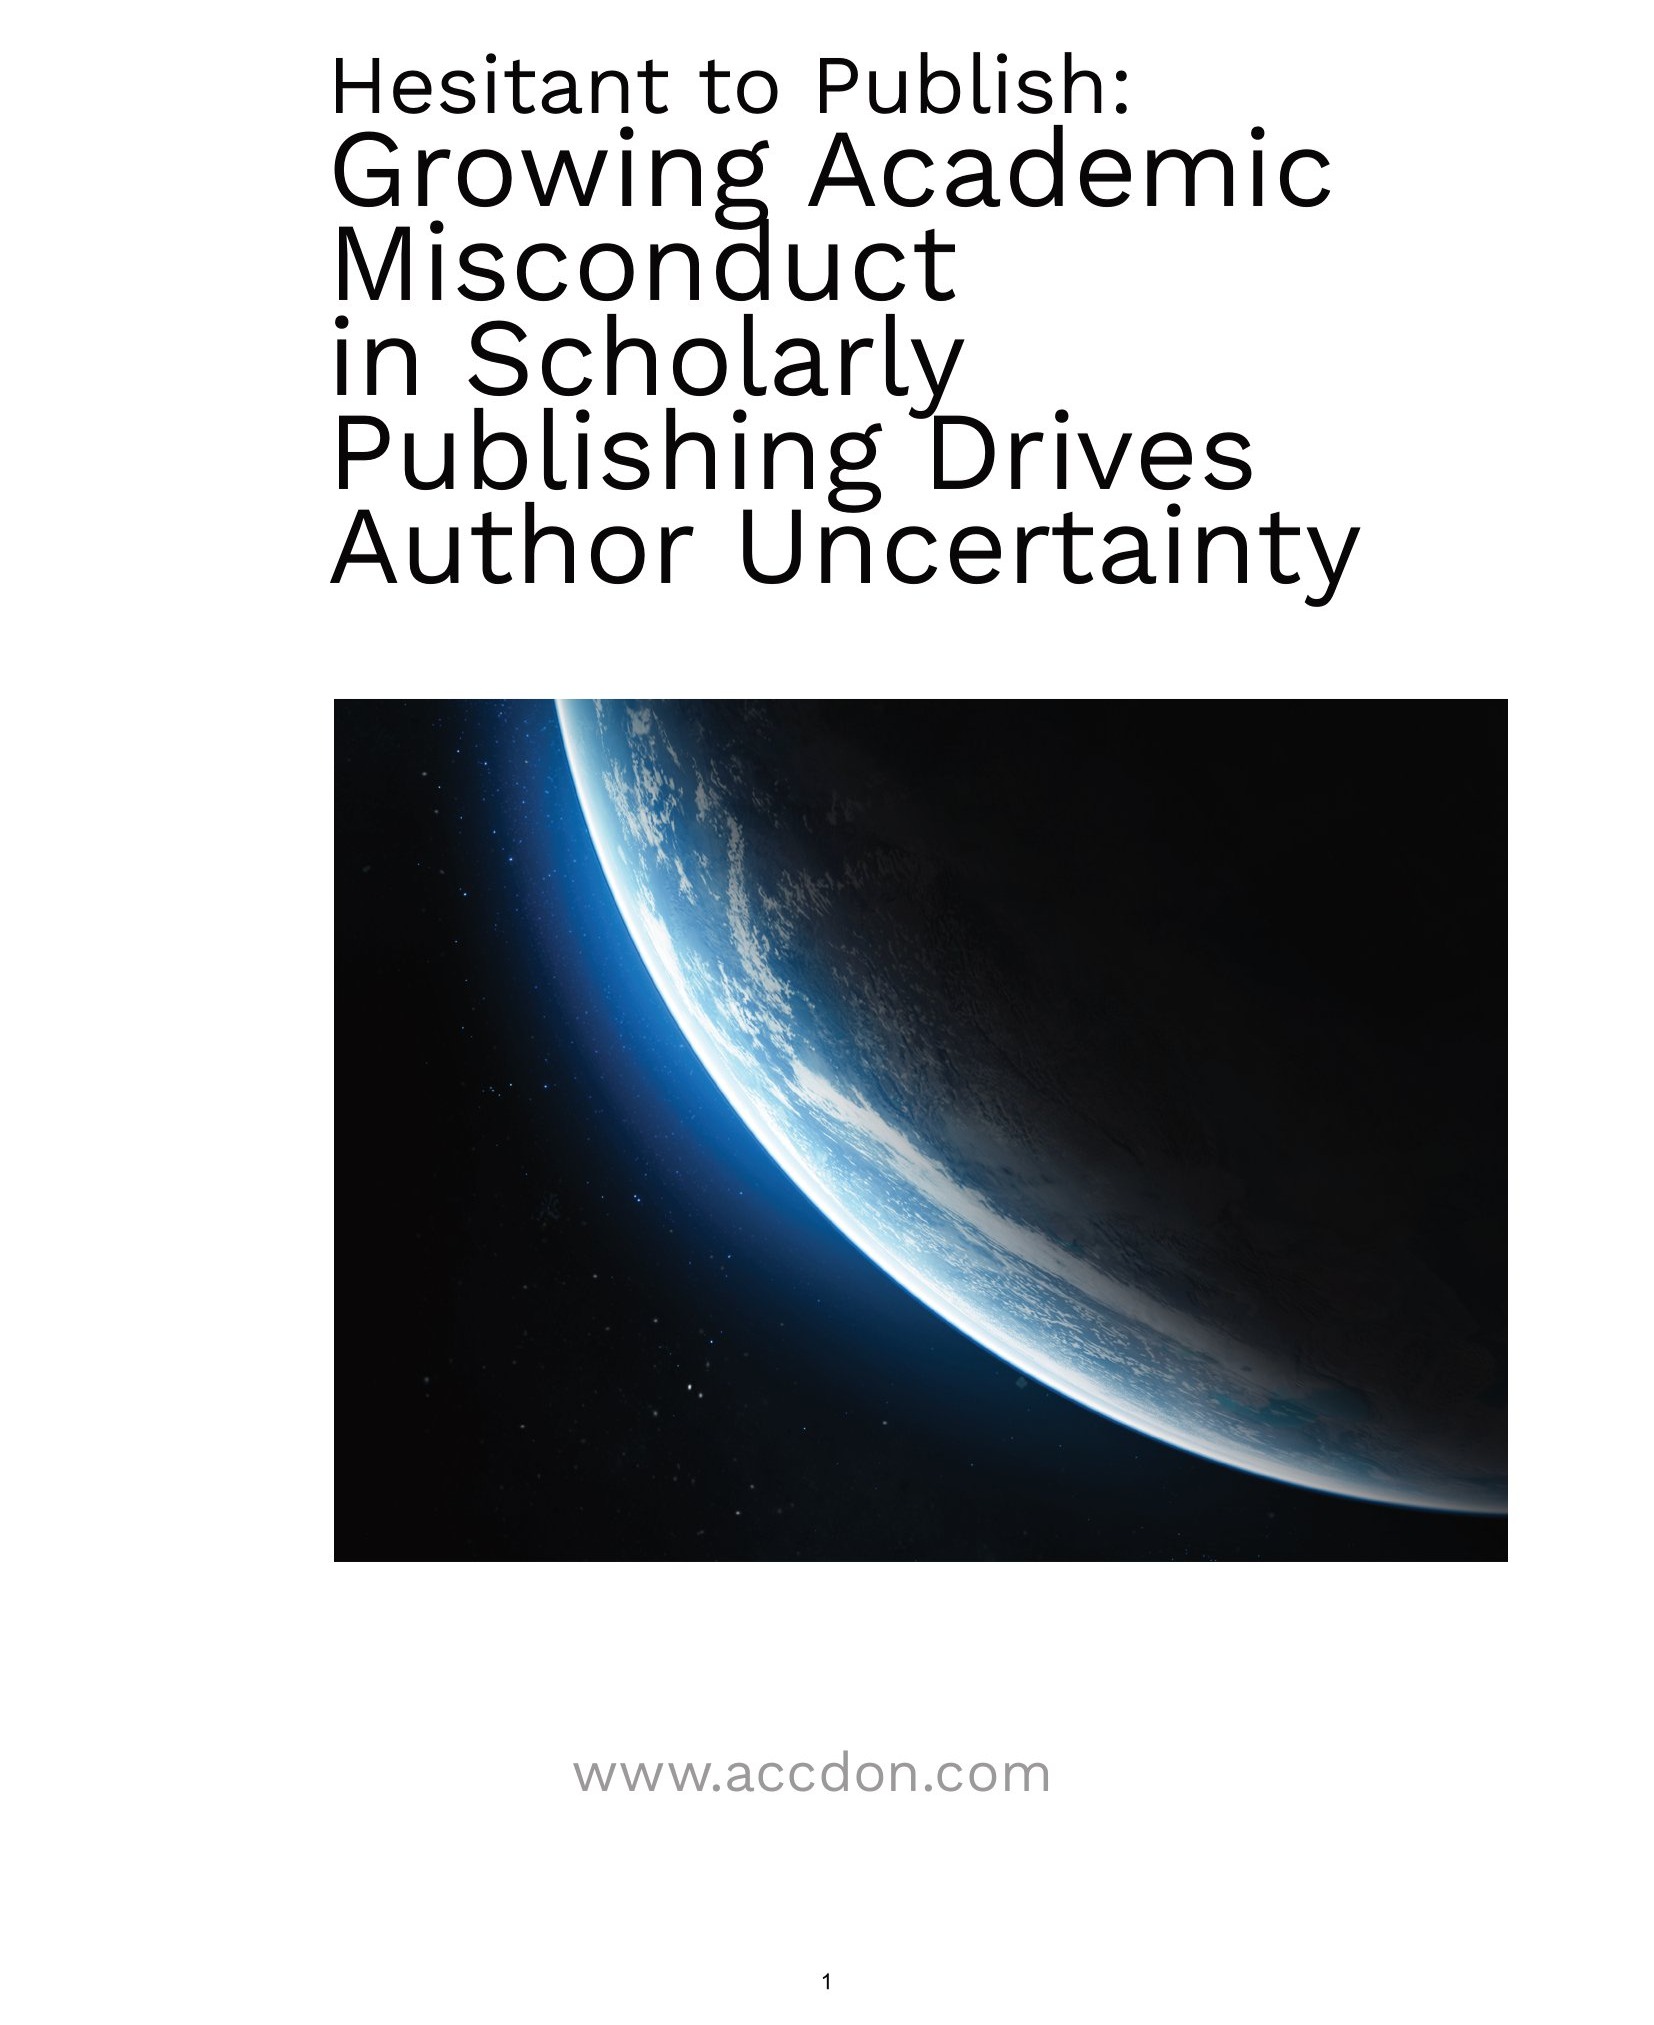 Accdon, a US-based academic editing firm examines changes in and international sentiments regarding scholarly publishing.